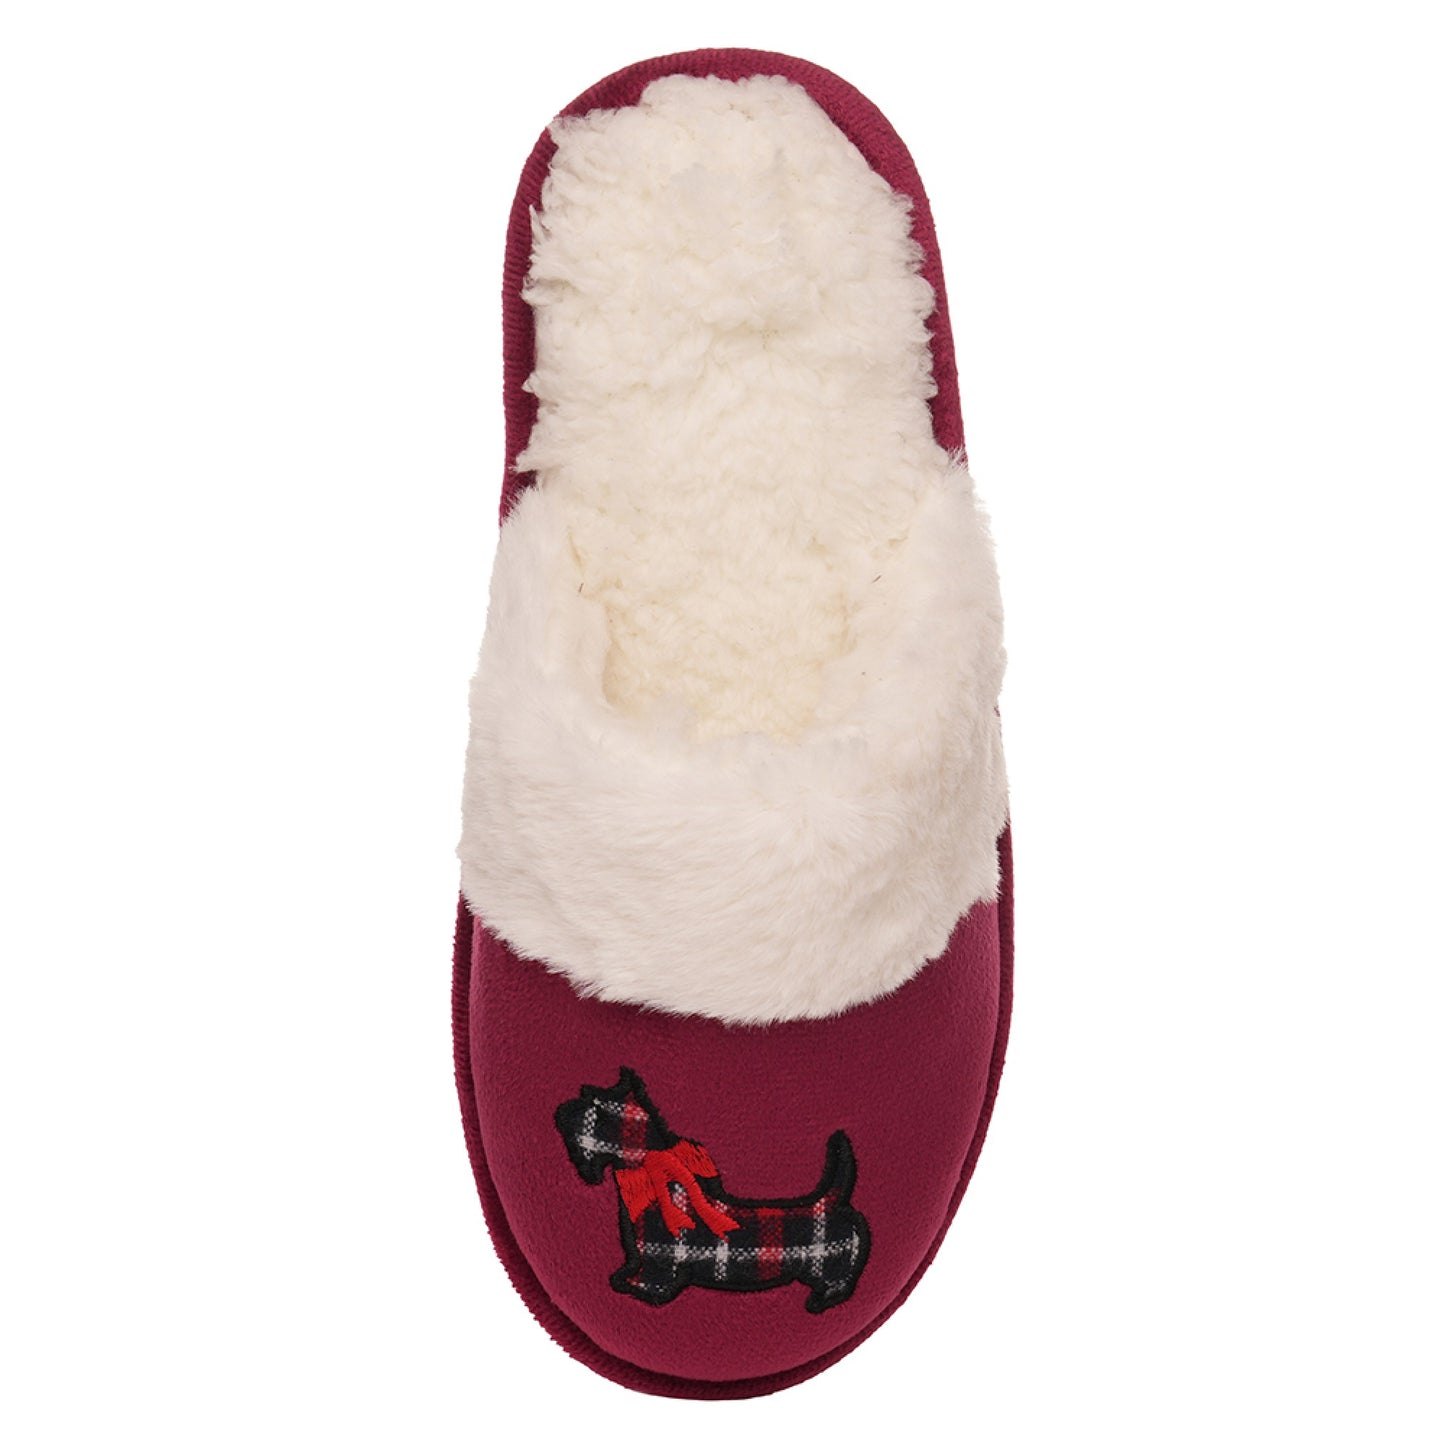 Ladies Pet Design Plush Mule Slip On Slippers with Faux Fur Lining - Dog or Cat